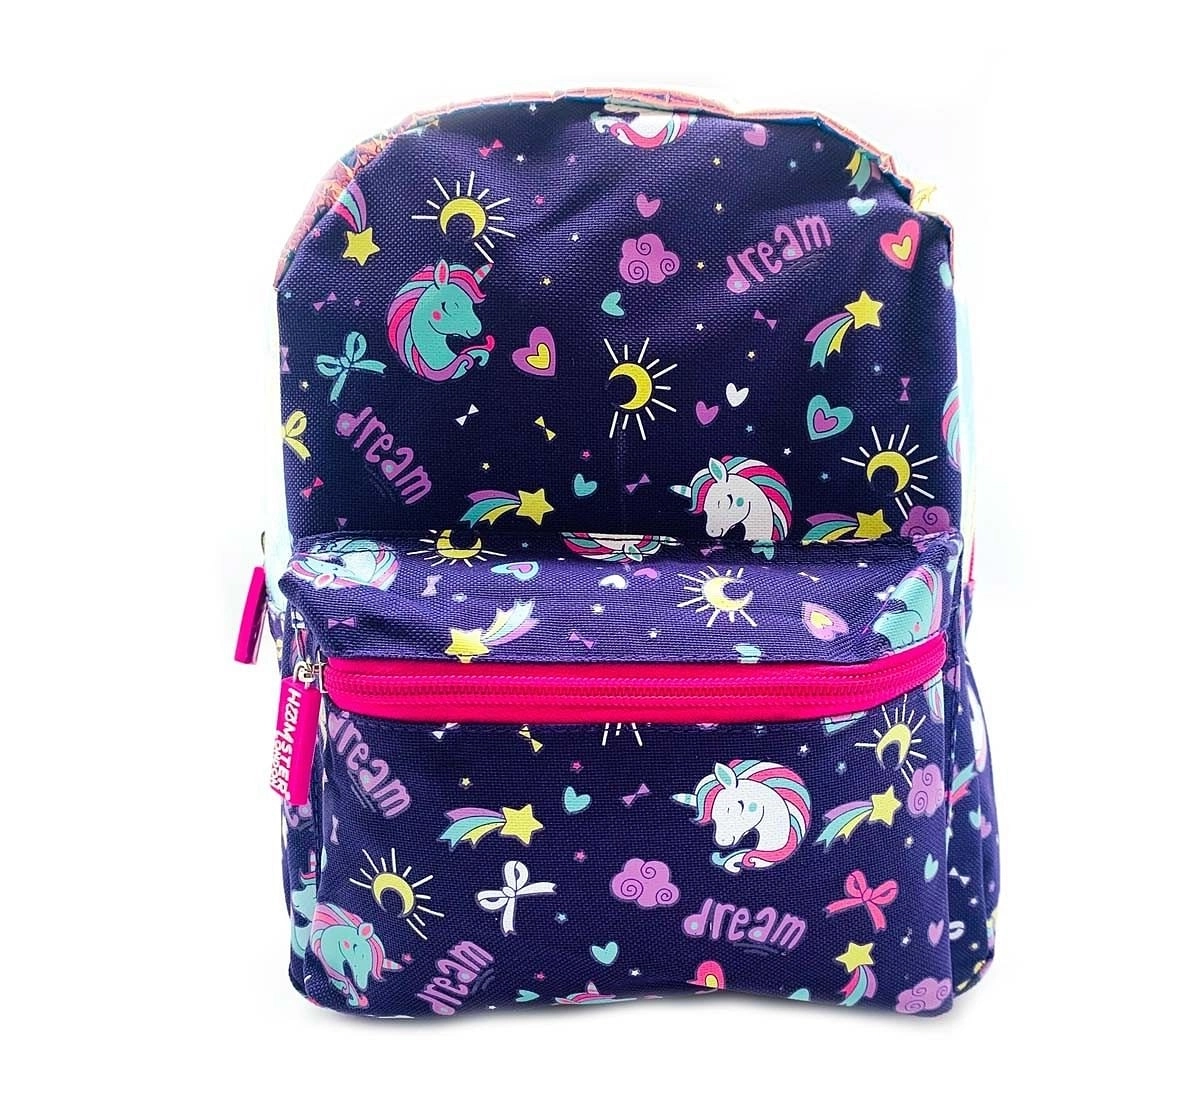 Hamster London Straight Fire Backpack Small Unicorn Bags for Kids Age 3Y+ (Purple)